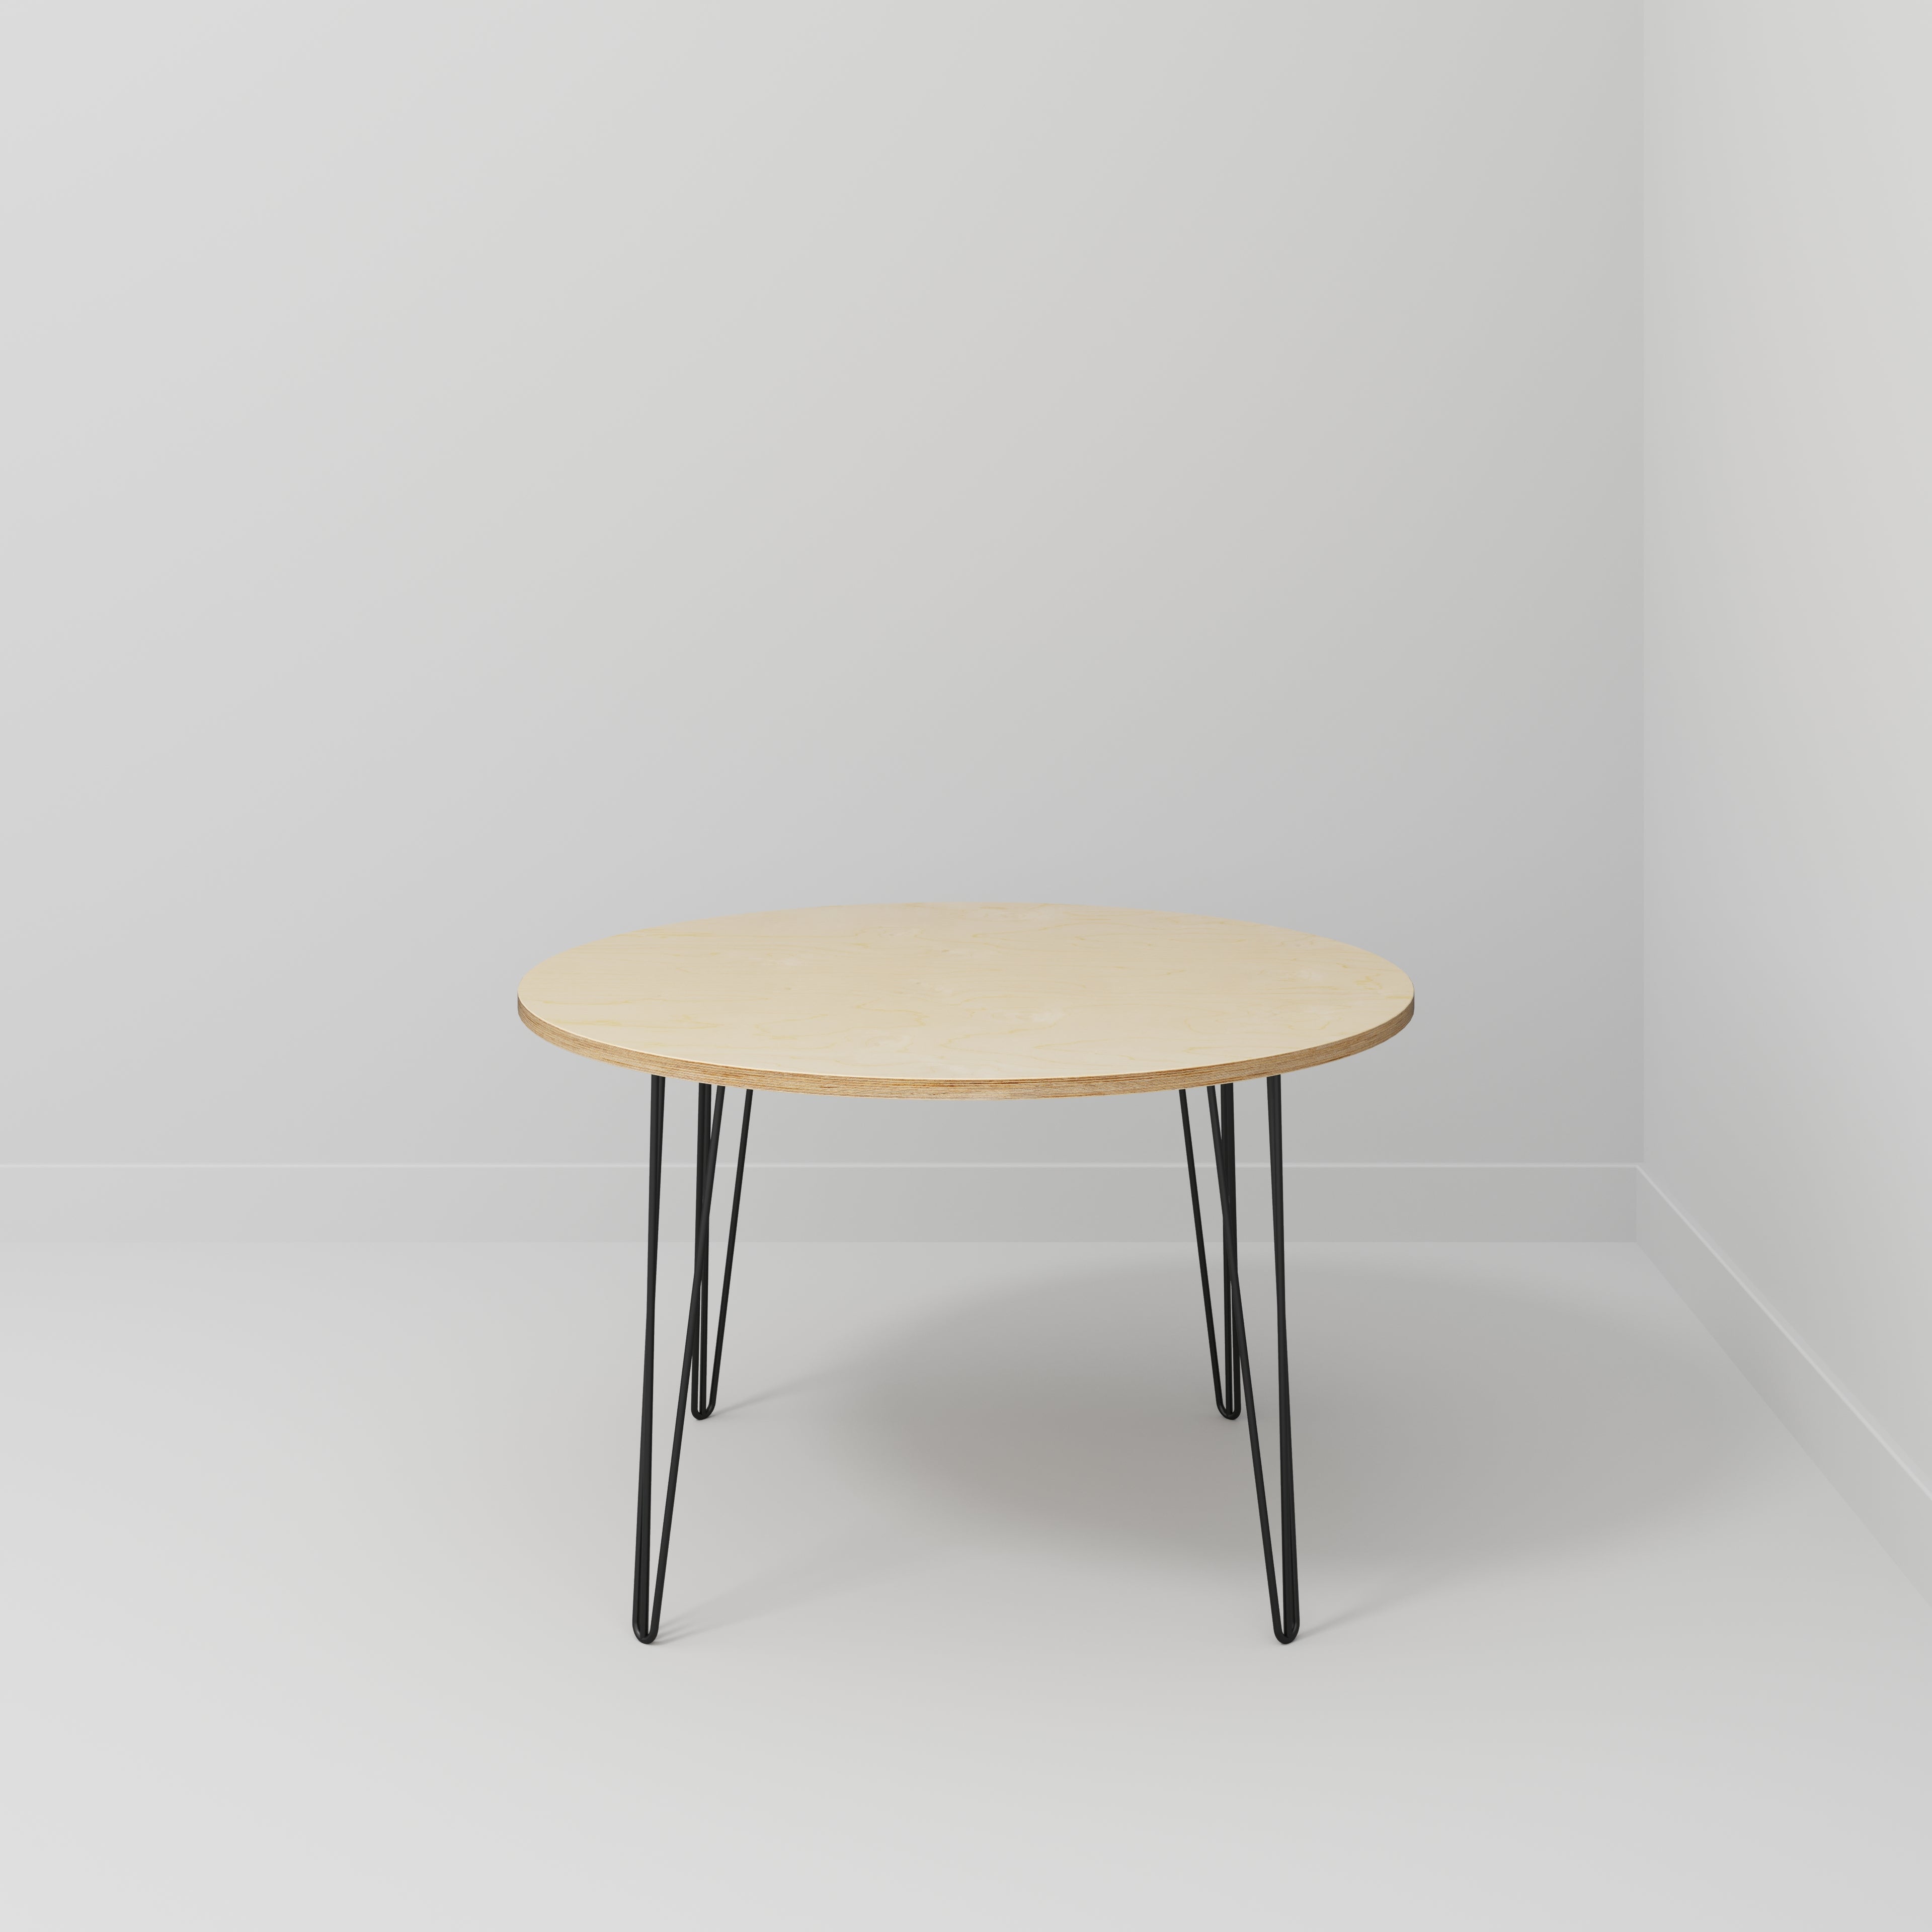 Custom Plywood Round Table with Hairpin Legs